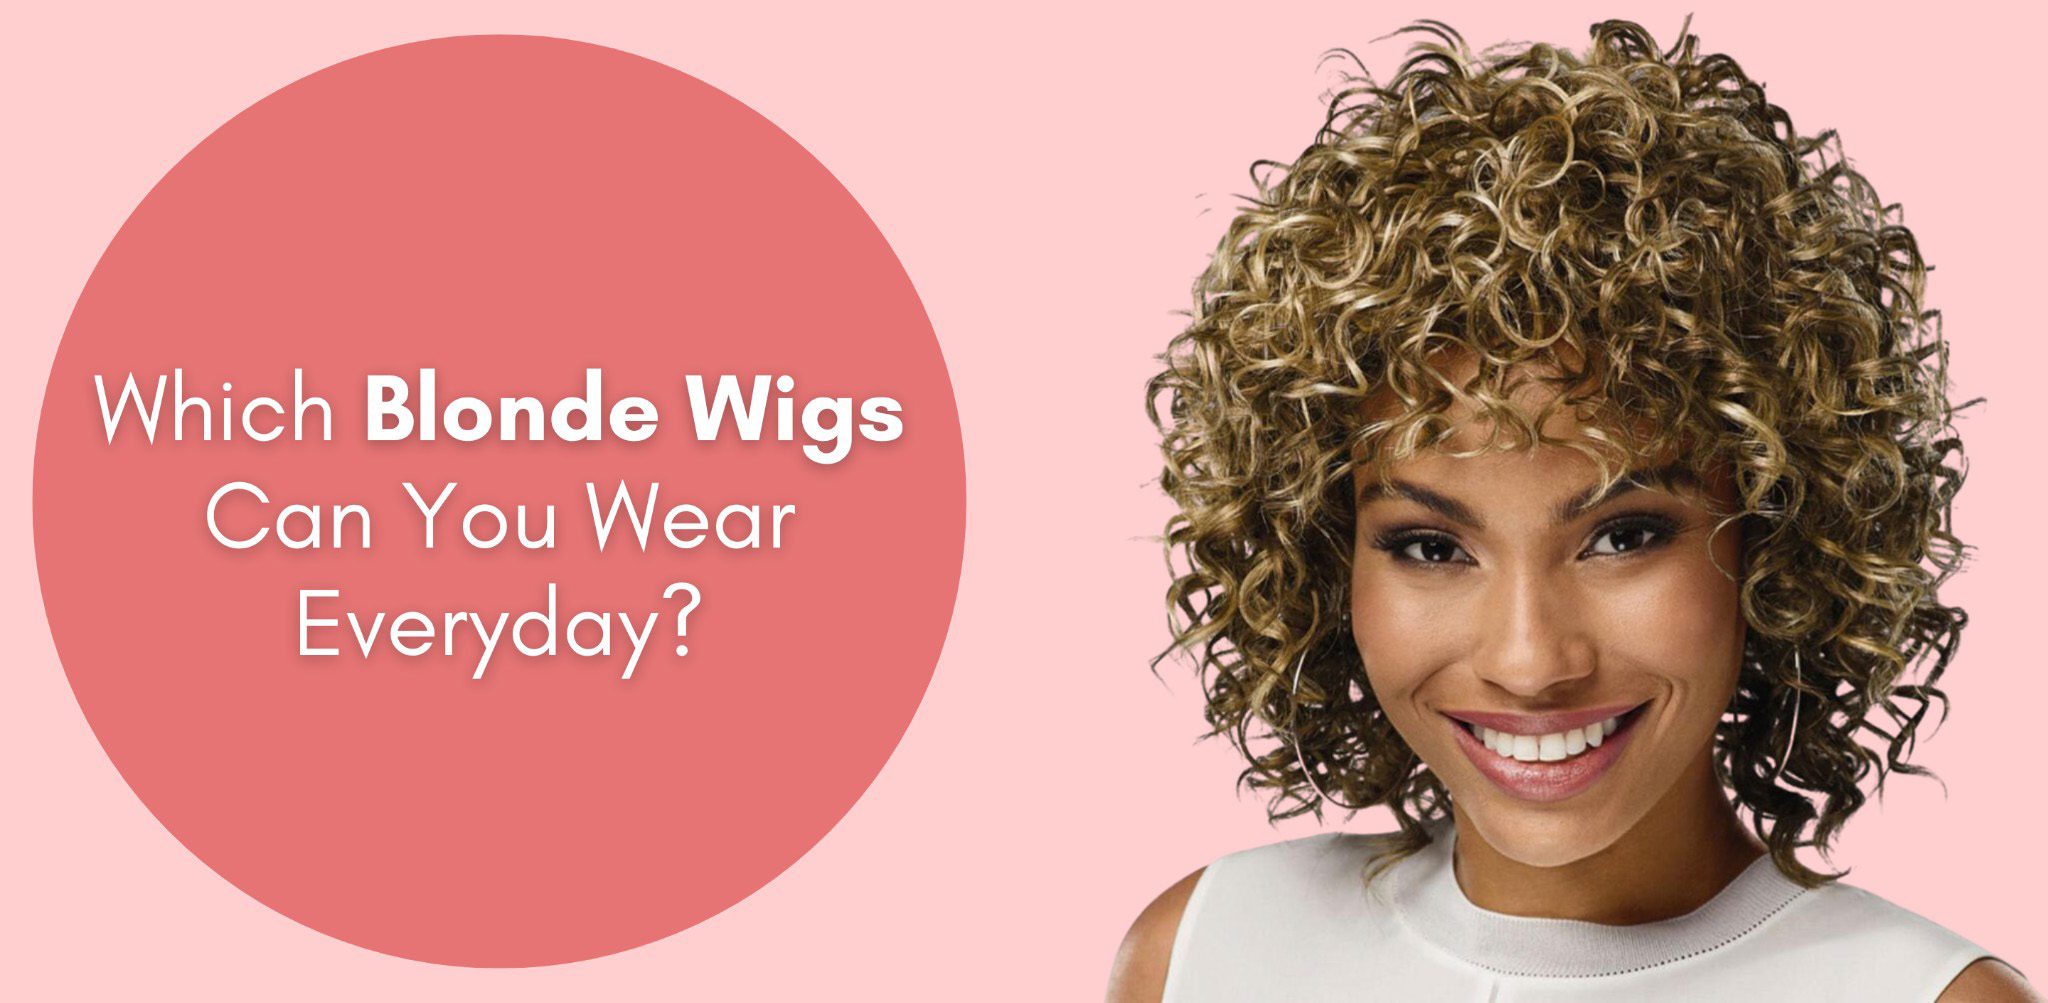 Which Blonde Wigs Can You Wear Everyday?